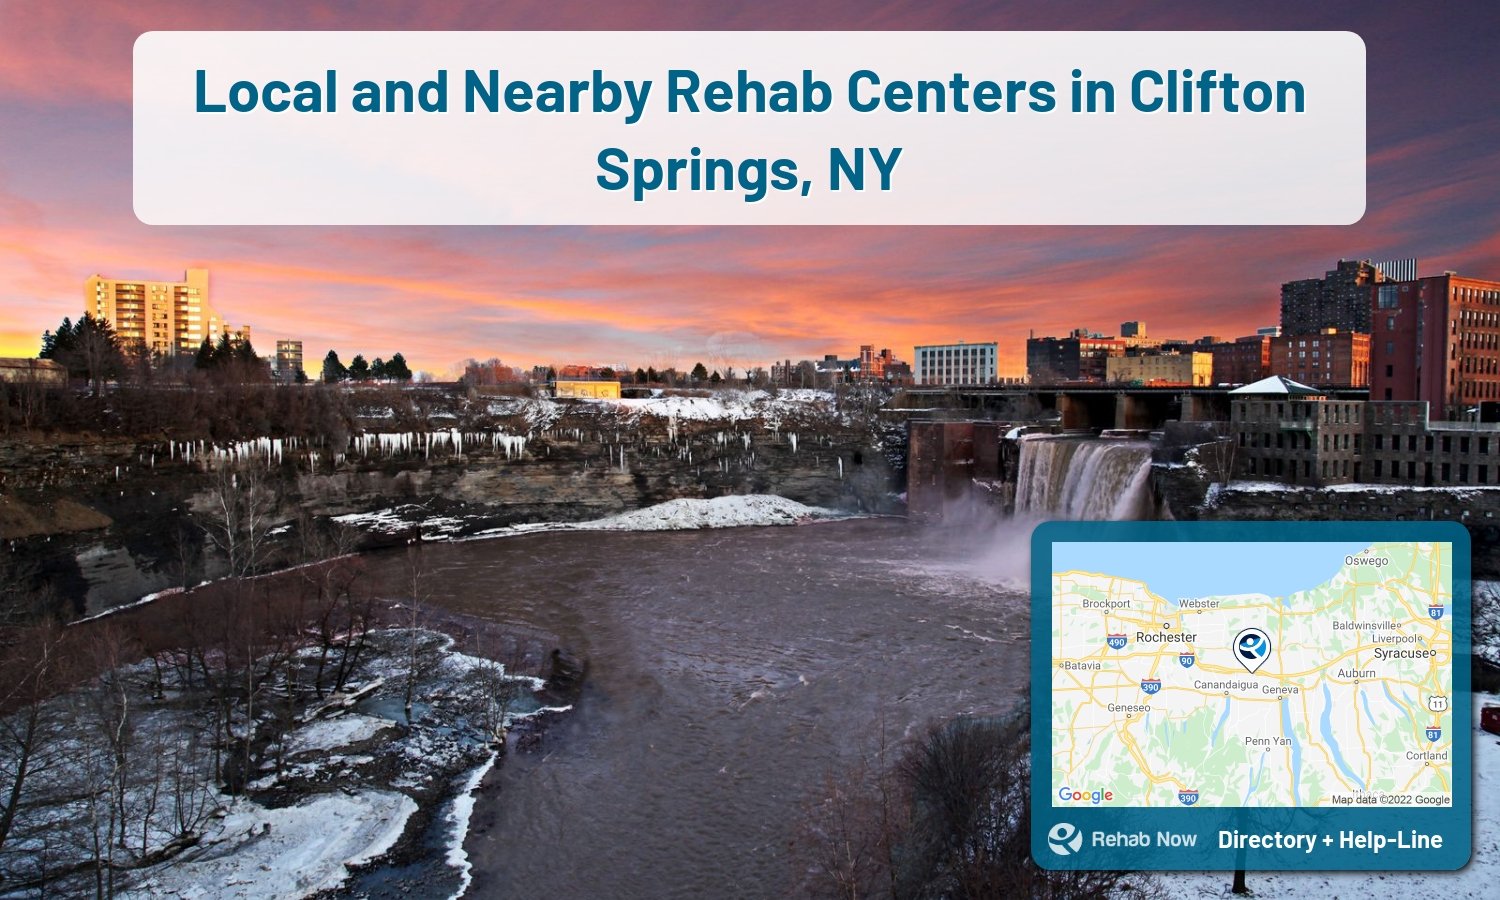 Clifton Springs, NY Treatment Centers. Find drug rehab in Clifton Springs, New York, or detox and treatment programs. Get the right help now!